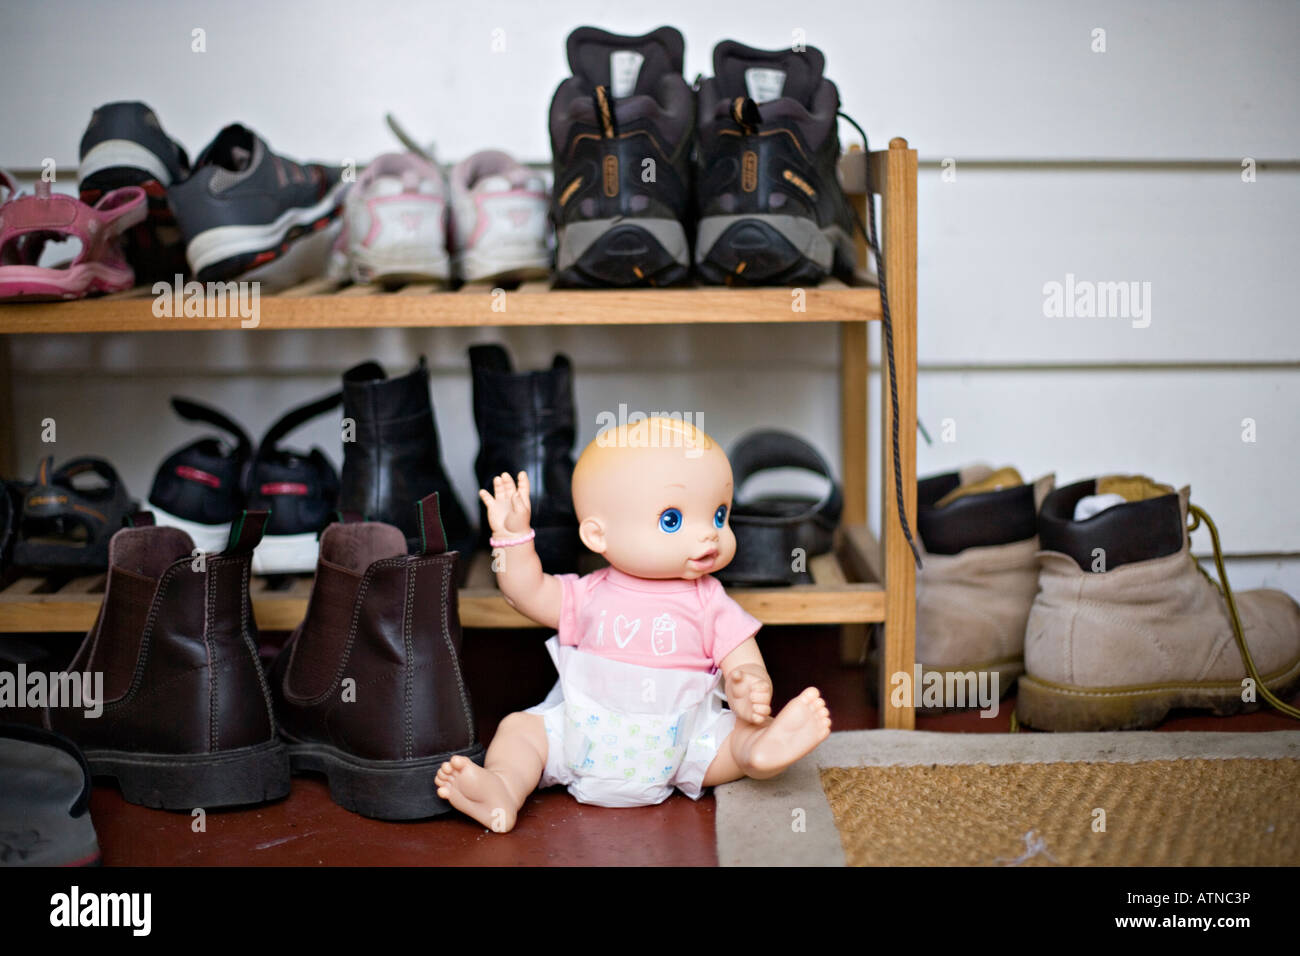 doll-and-shoe-rack-stock-photo-alamy